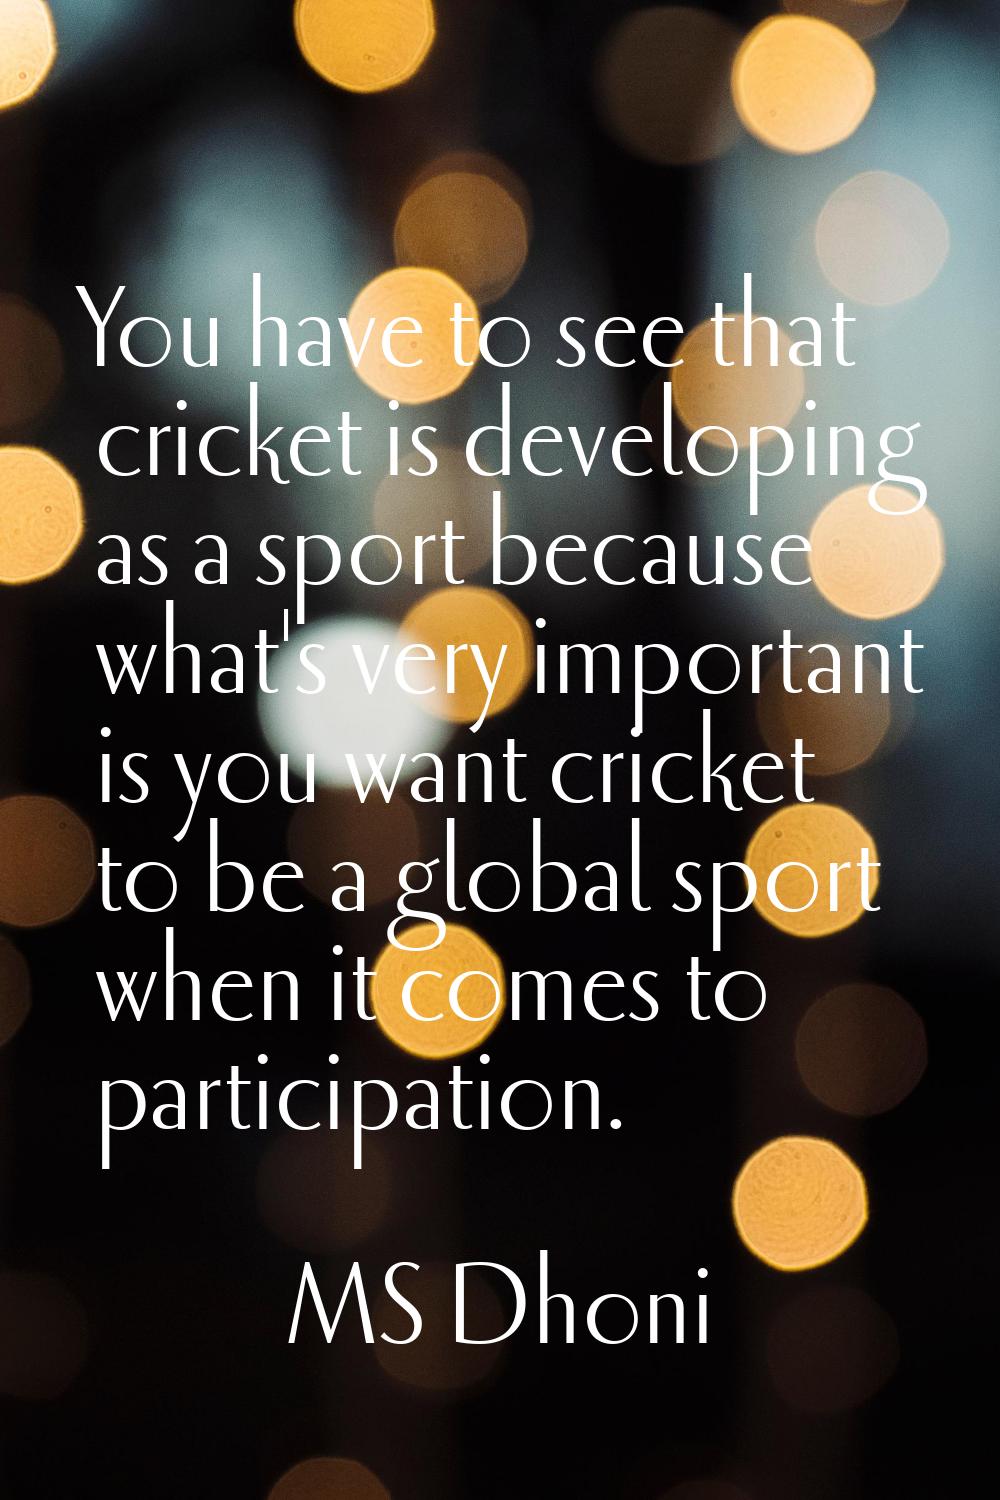 You have to see that cricket is developing as a sport because what's very important is you want cri